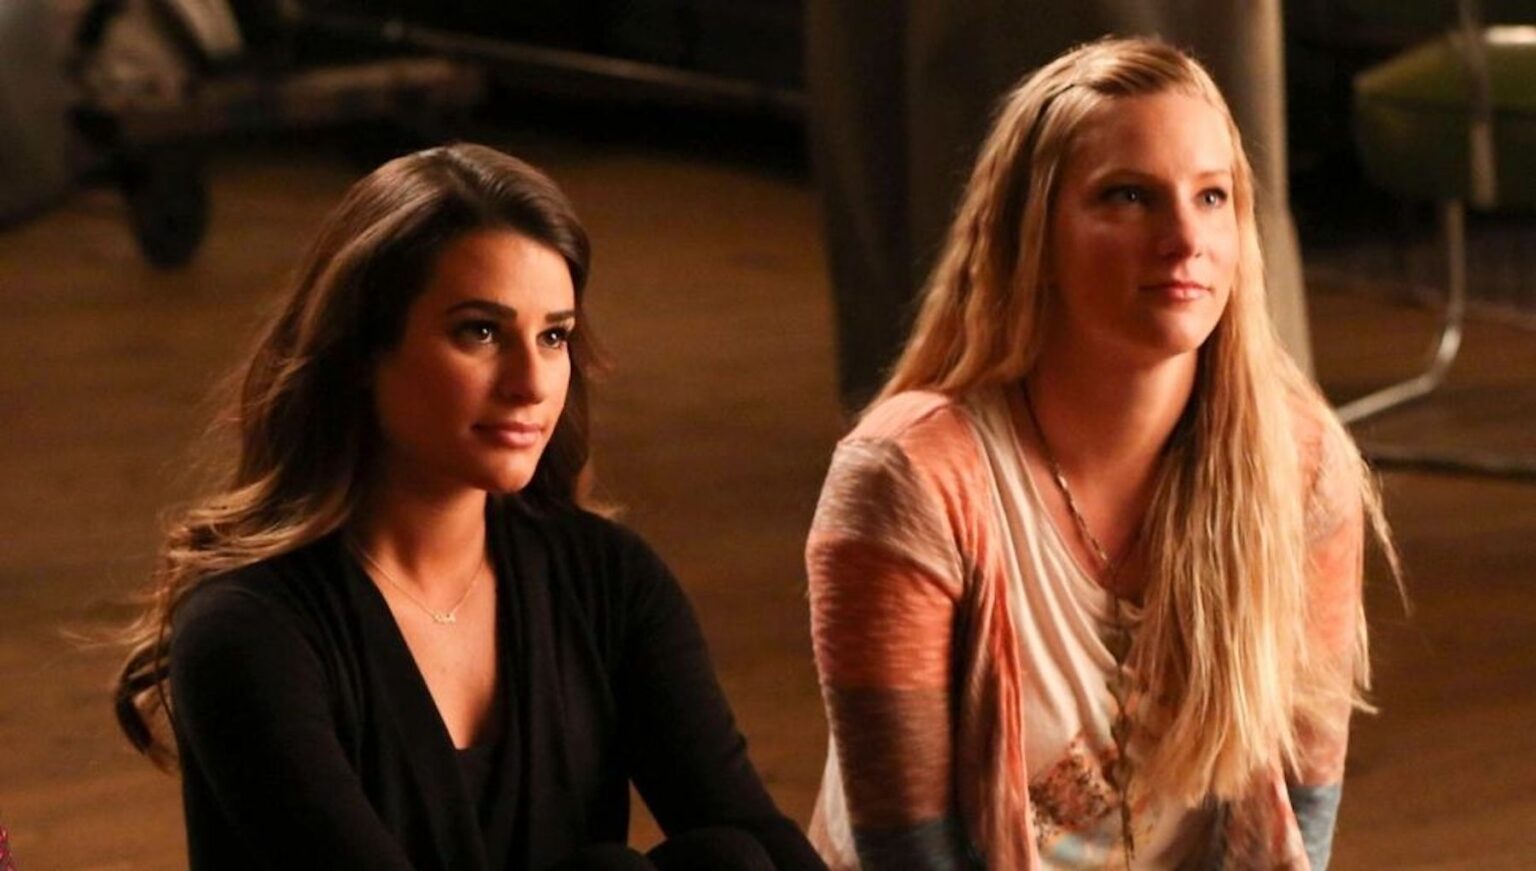 'Glee' star Heather Morris discusses Lea Michele's bad behavior and why the cast didn't going to the execs about it. Warm those pipes up and dive in.